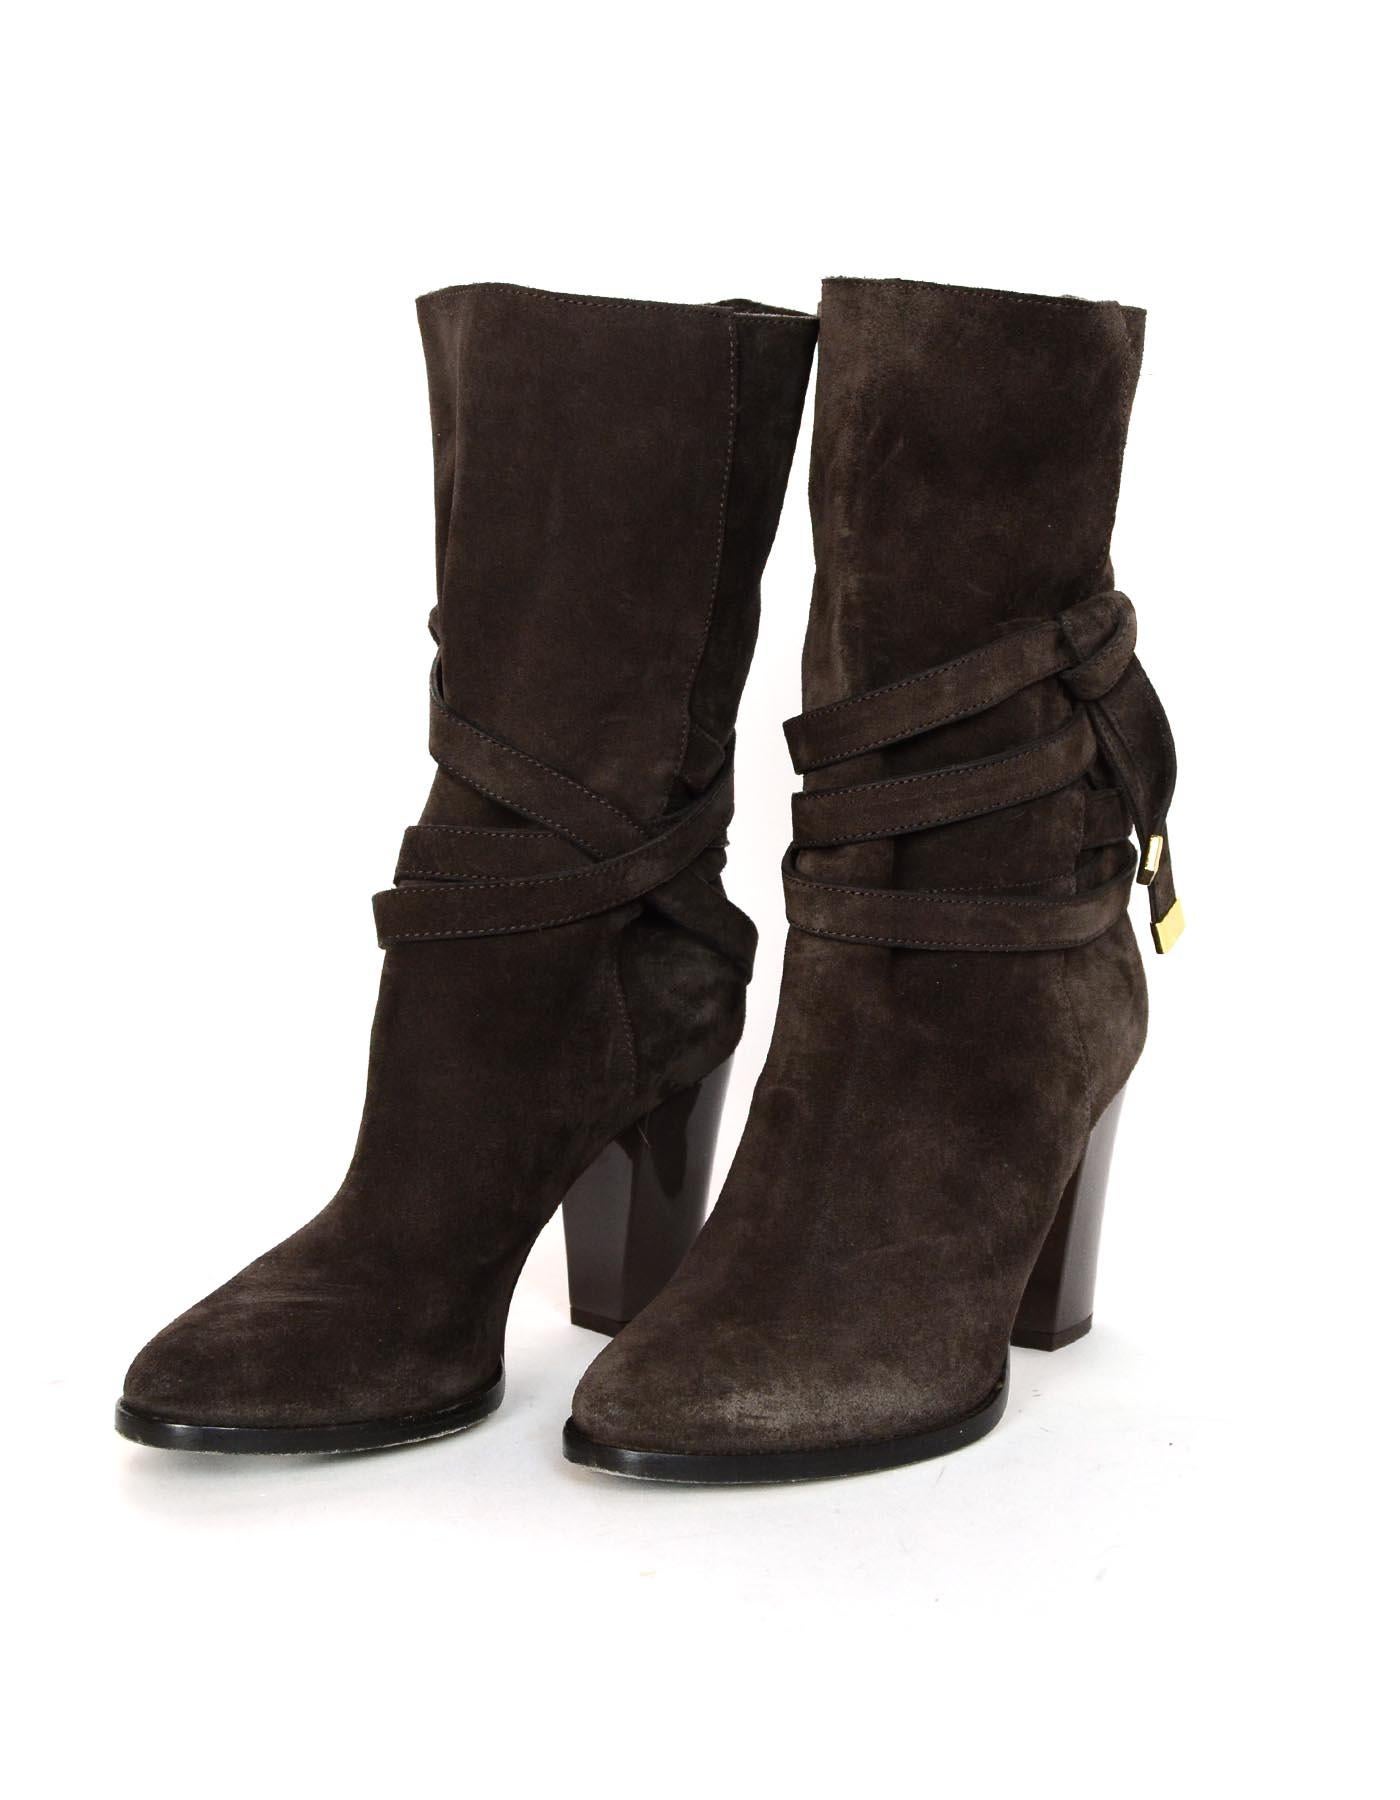 Jimmy Choo Brown Suede Heeled Booties Sz 37.5

Made In: Italy
Color: Brown
Hardware: Goldtone
Materials: Suede
Closure/Opening: Pull on
Overall Condition: Very good pre-owned condition with exception of some scuffing/scratches on right toe, some